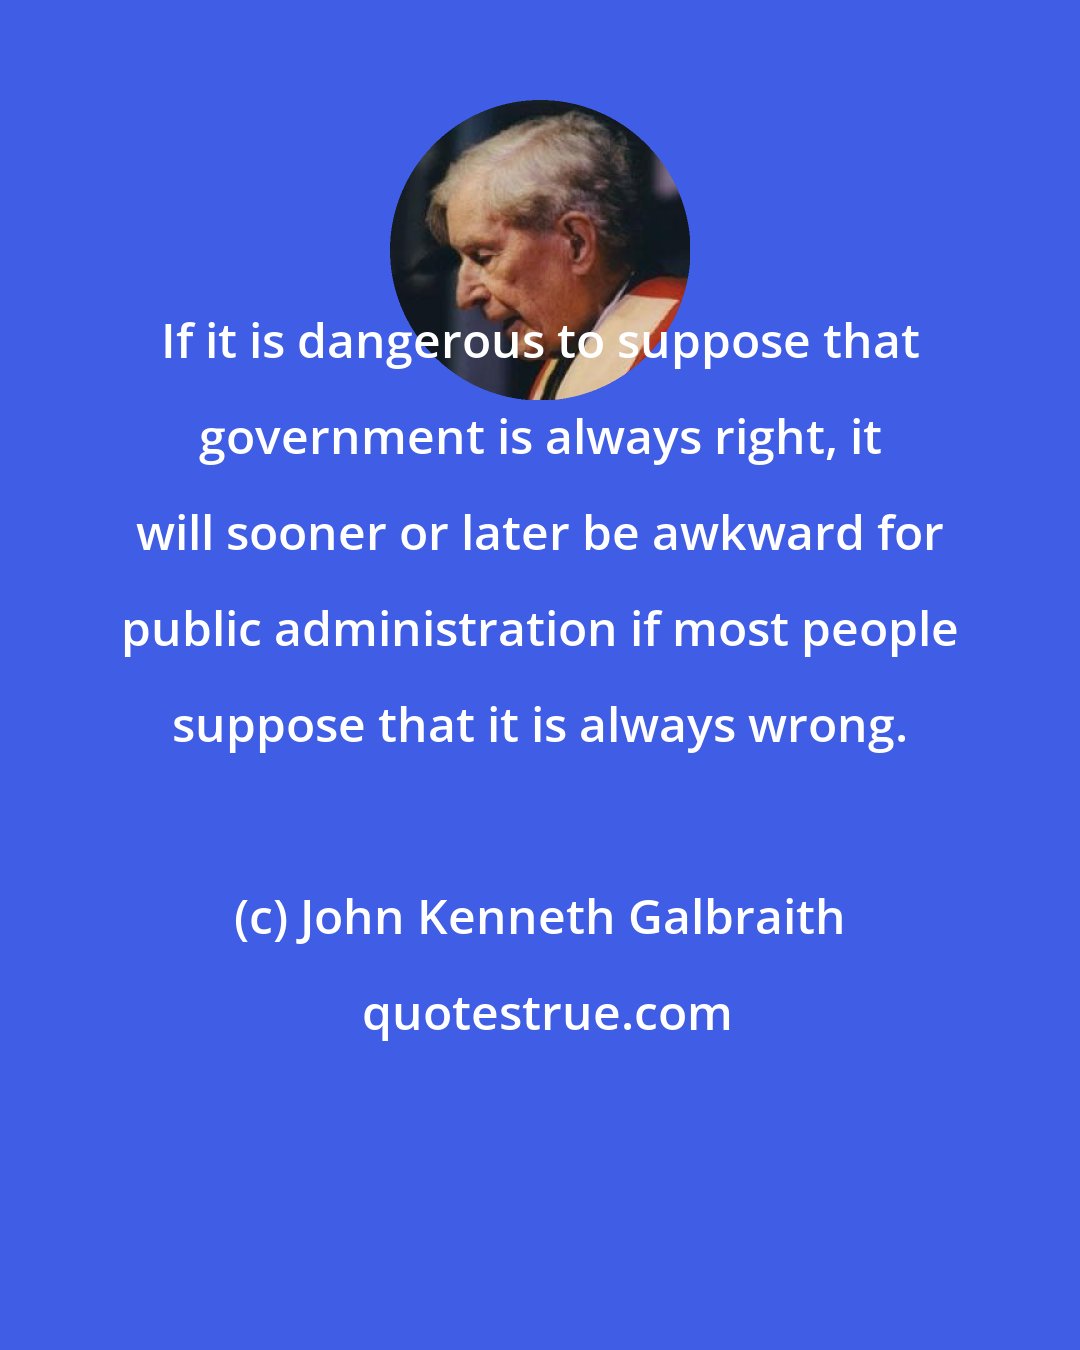 John Kenneth Galbraith: If it is dangerous to suppose that government is always right, it will sooner or later be awkward for public administration if most people suppose that it is always wrong.